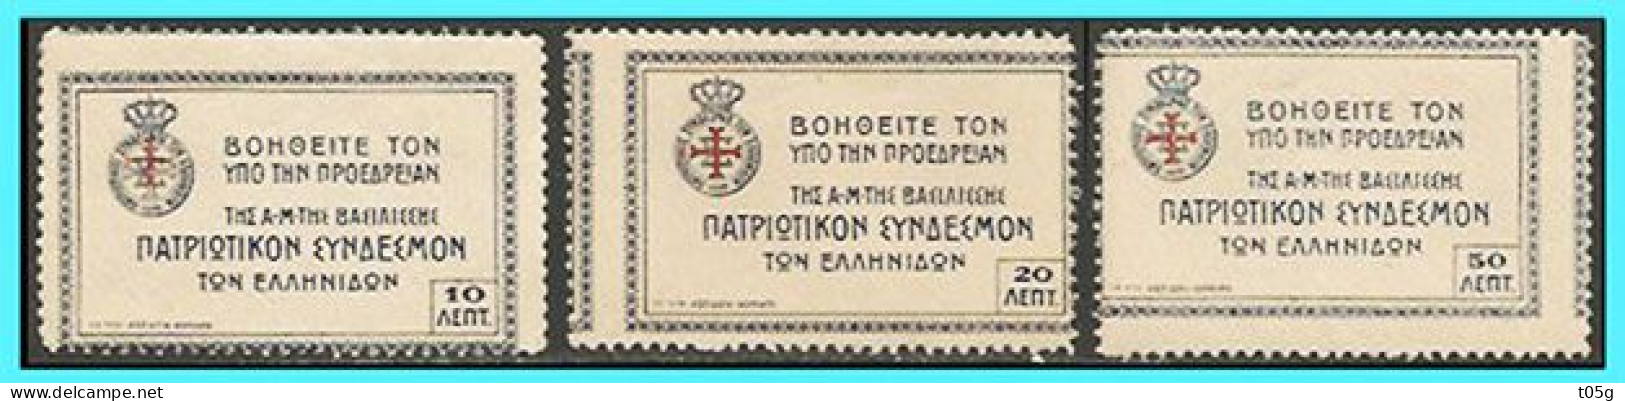 GREECE- GRECE- HELLAS  1915:Error Perforation   " Greek Wommen"s Patriotic League" Charity Stamps Compl. Set MNH**  "RR" - Charity Issues